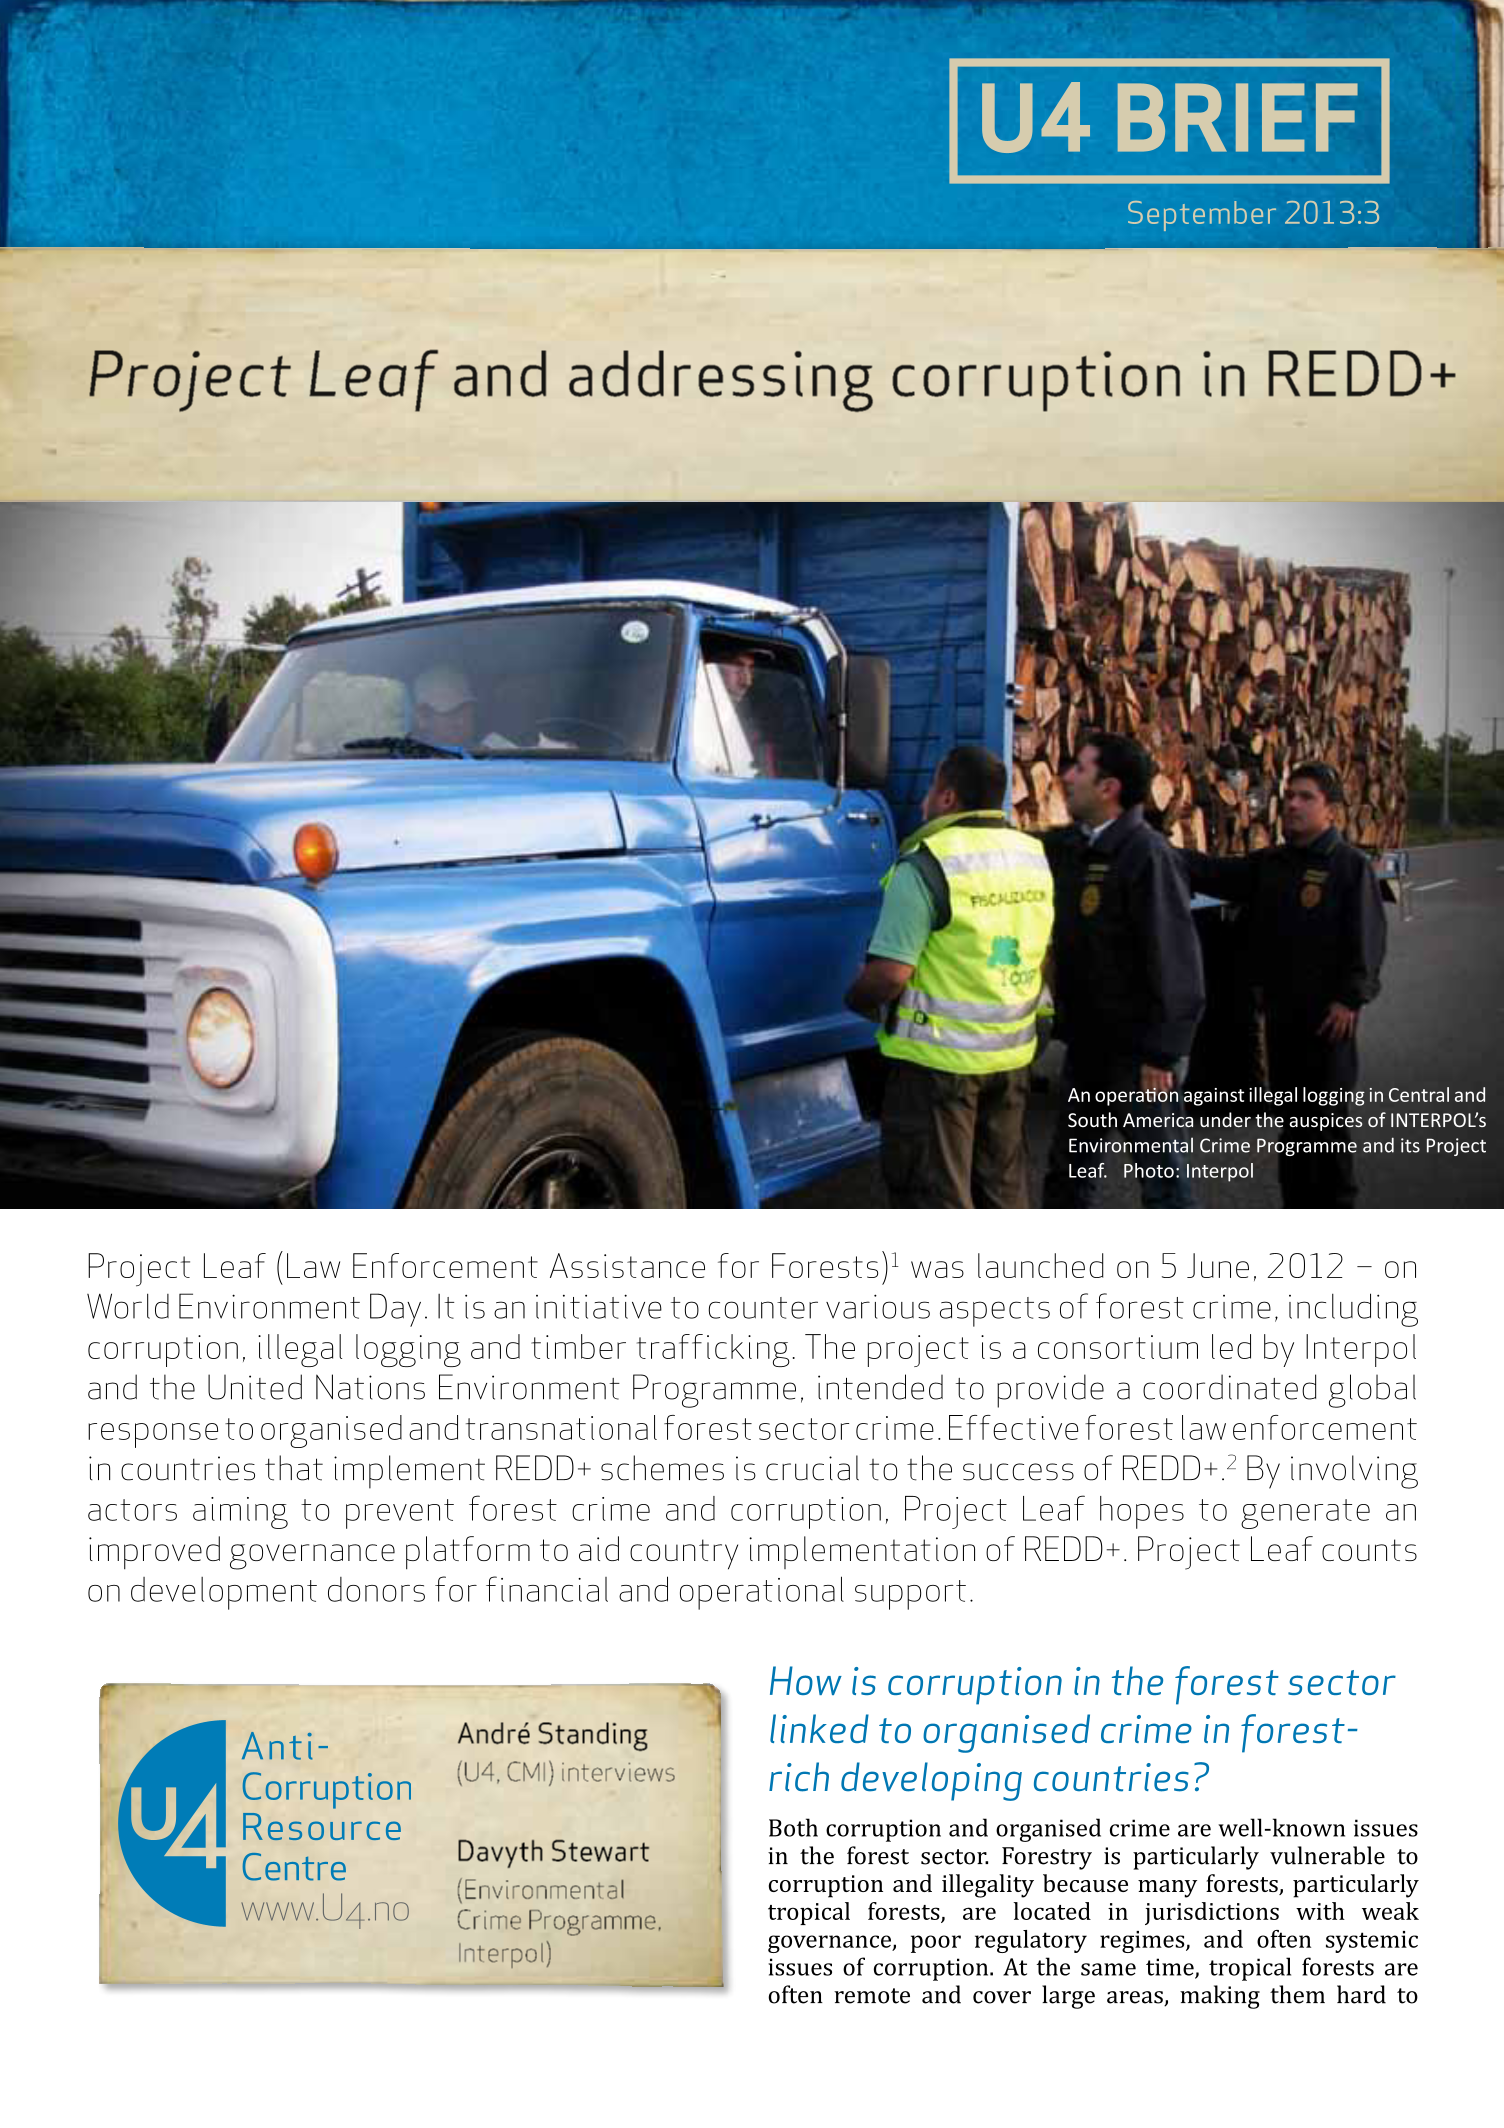 Project Leaf and addressing corruption in REDD+